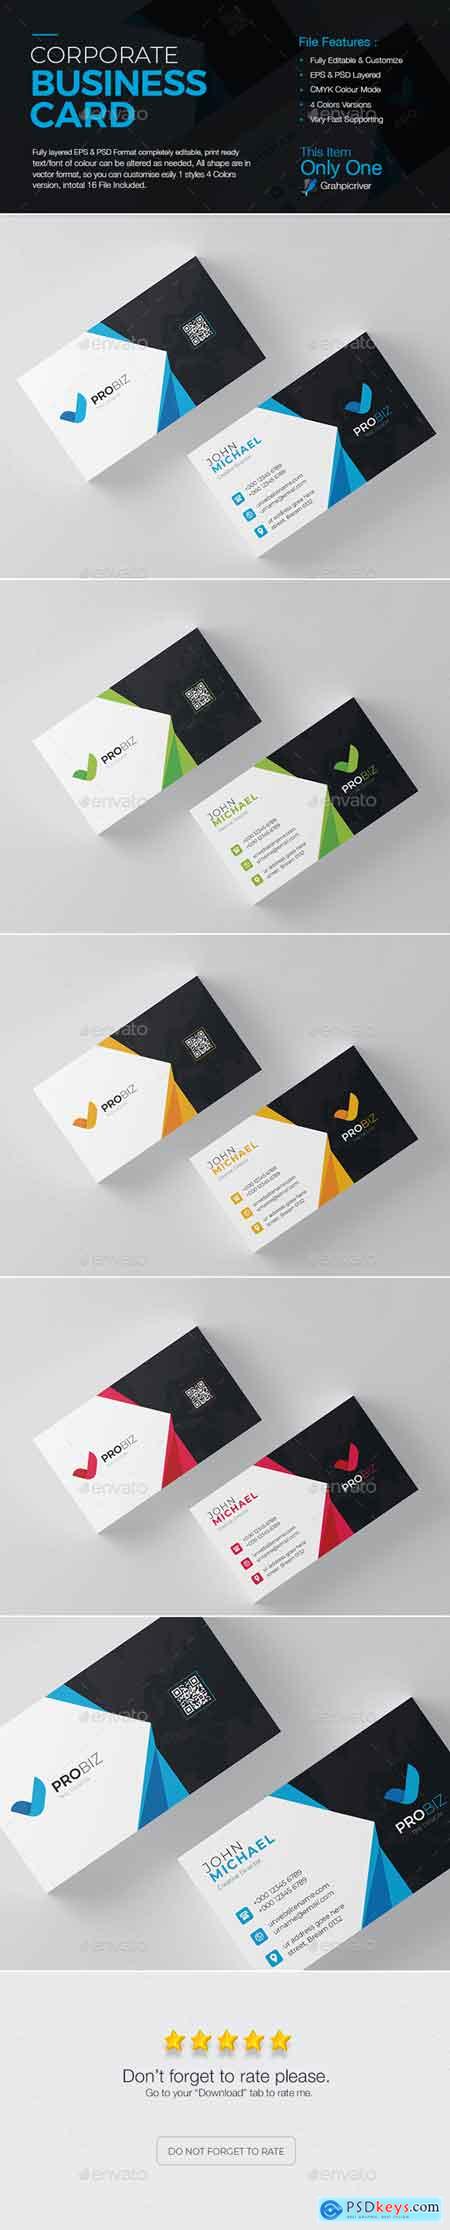 Graphicriver Business Card